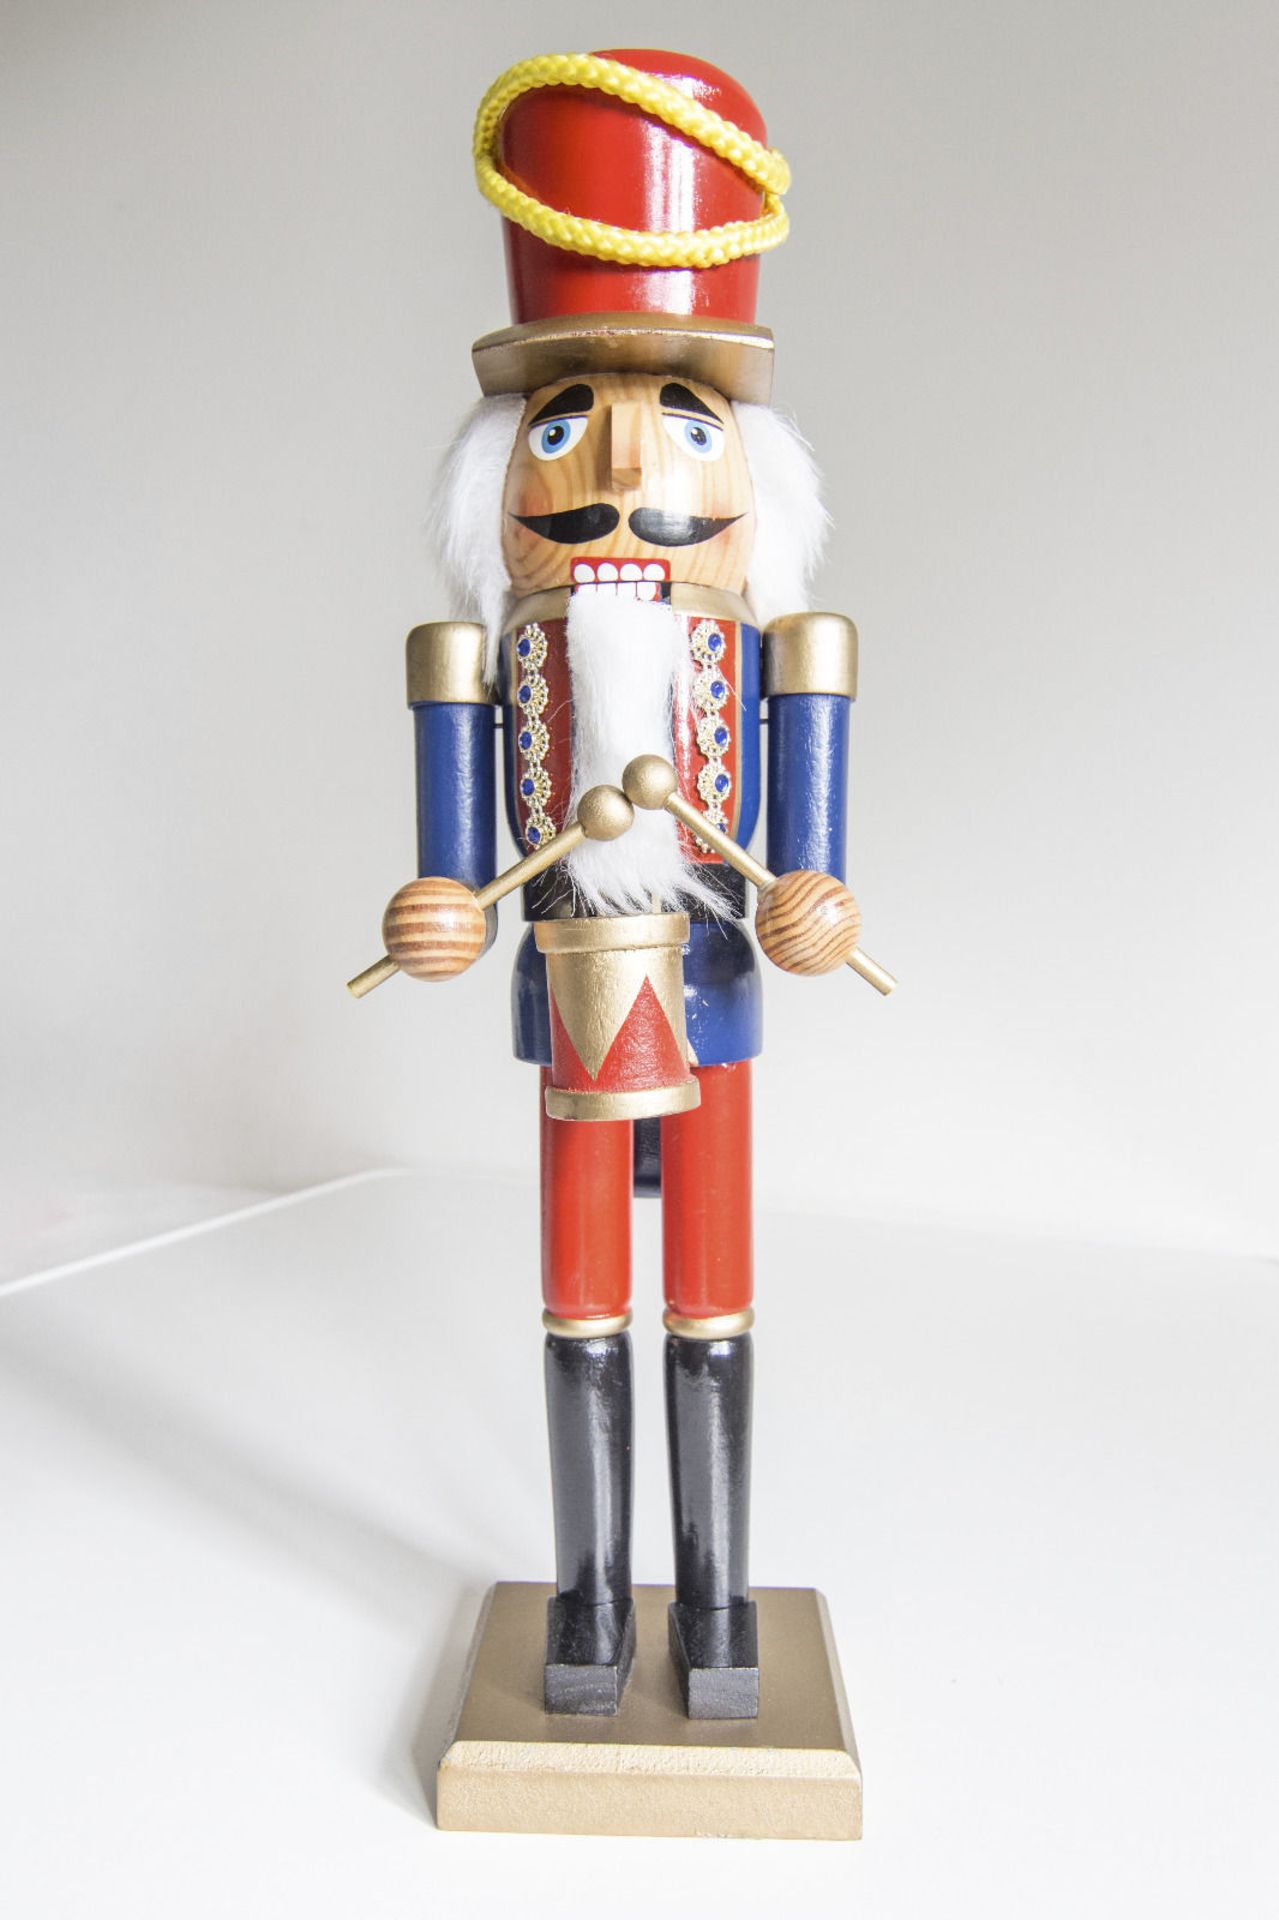 V Brand New Large wooden hand painted soldier nut-cracker/ornament - 24" tall X 2 YOUR BID PRICE - Image 2 of 2